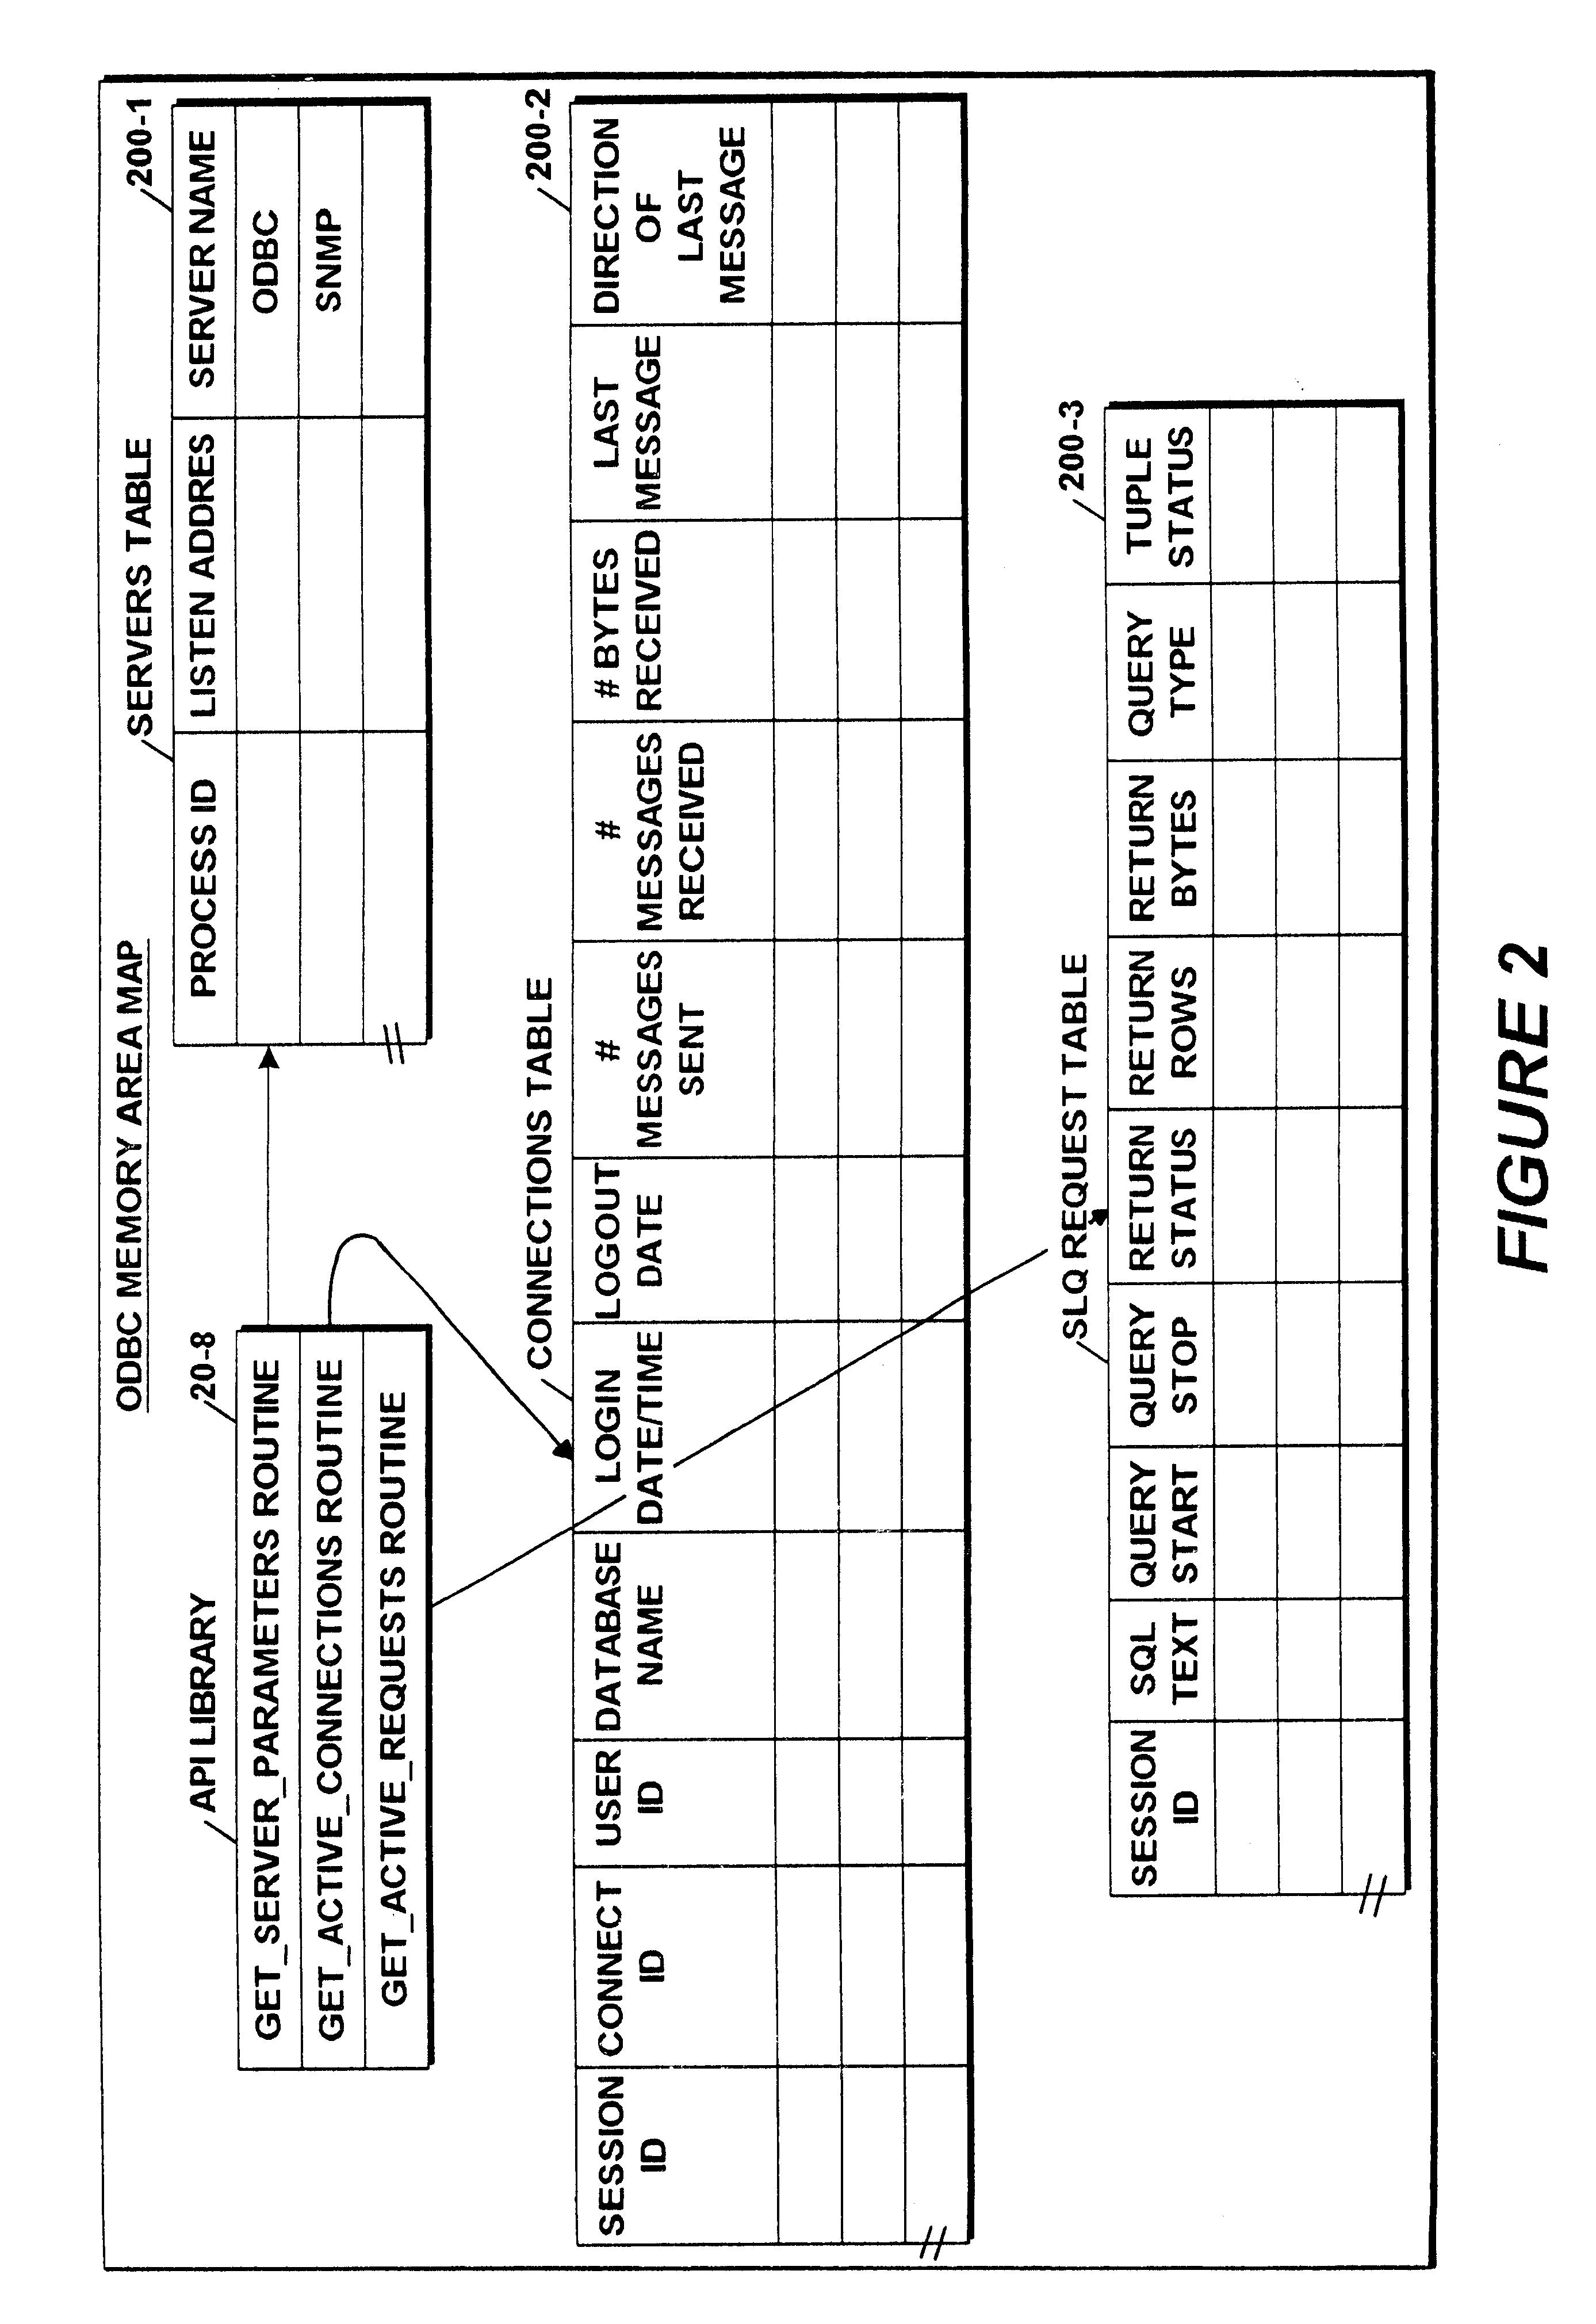 Application programming interface for monitoring data warehouse activity occurring through a client/server open database connectivity interface